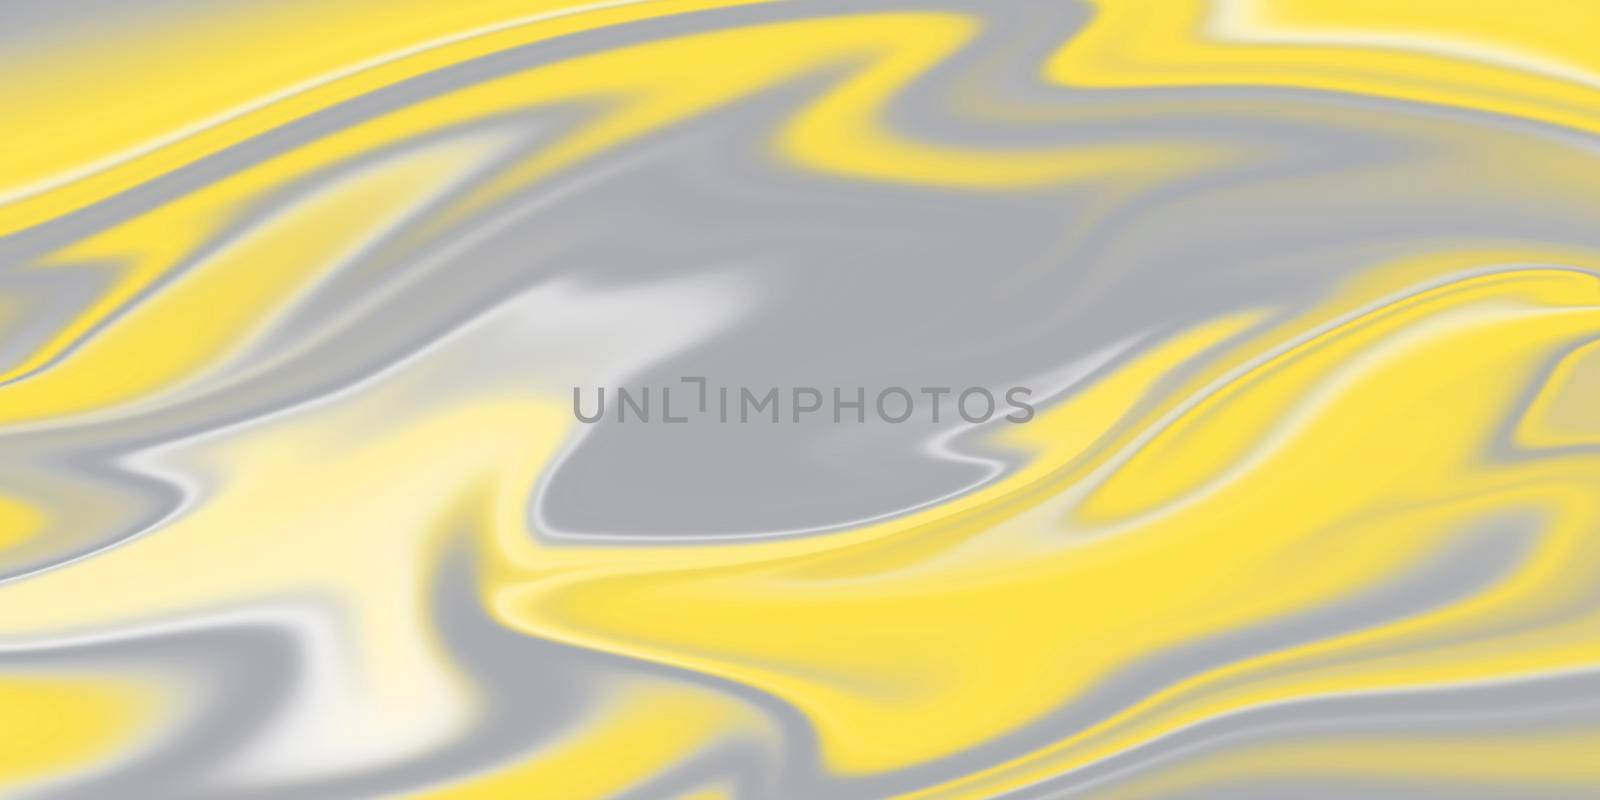 Color of the year 2021 yellow and gray design of abstract fluid texture background by Myimagine